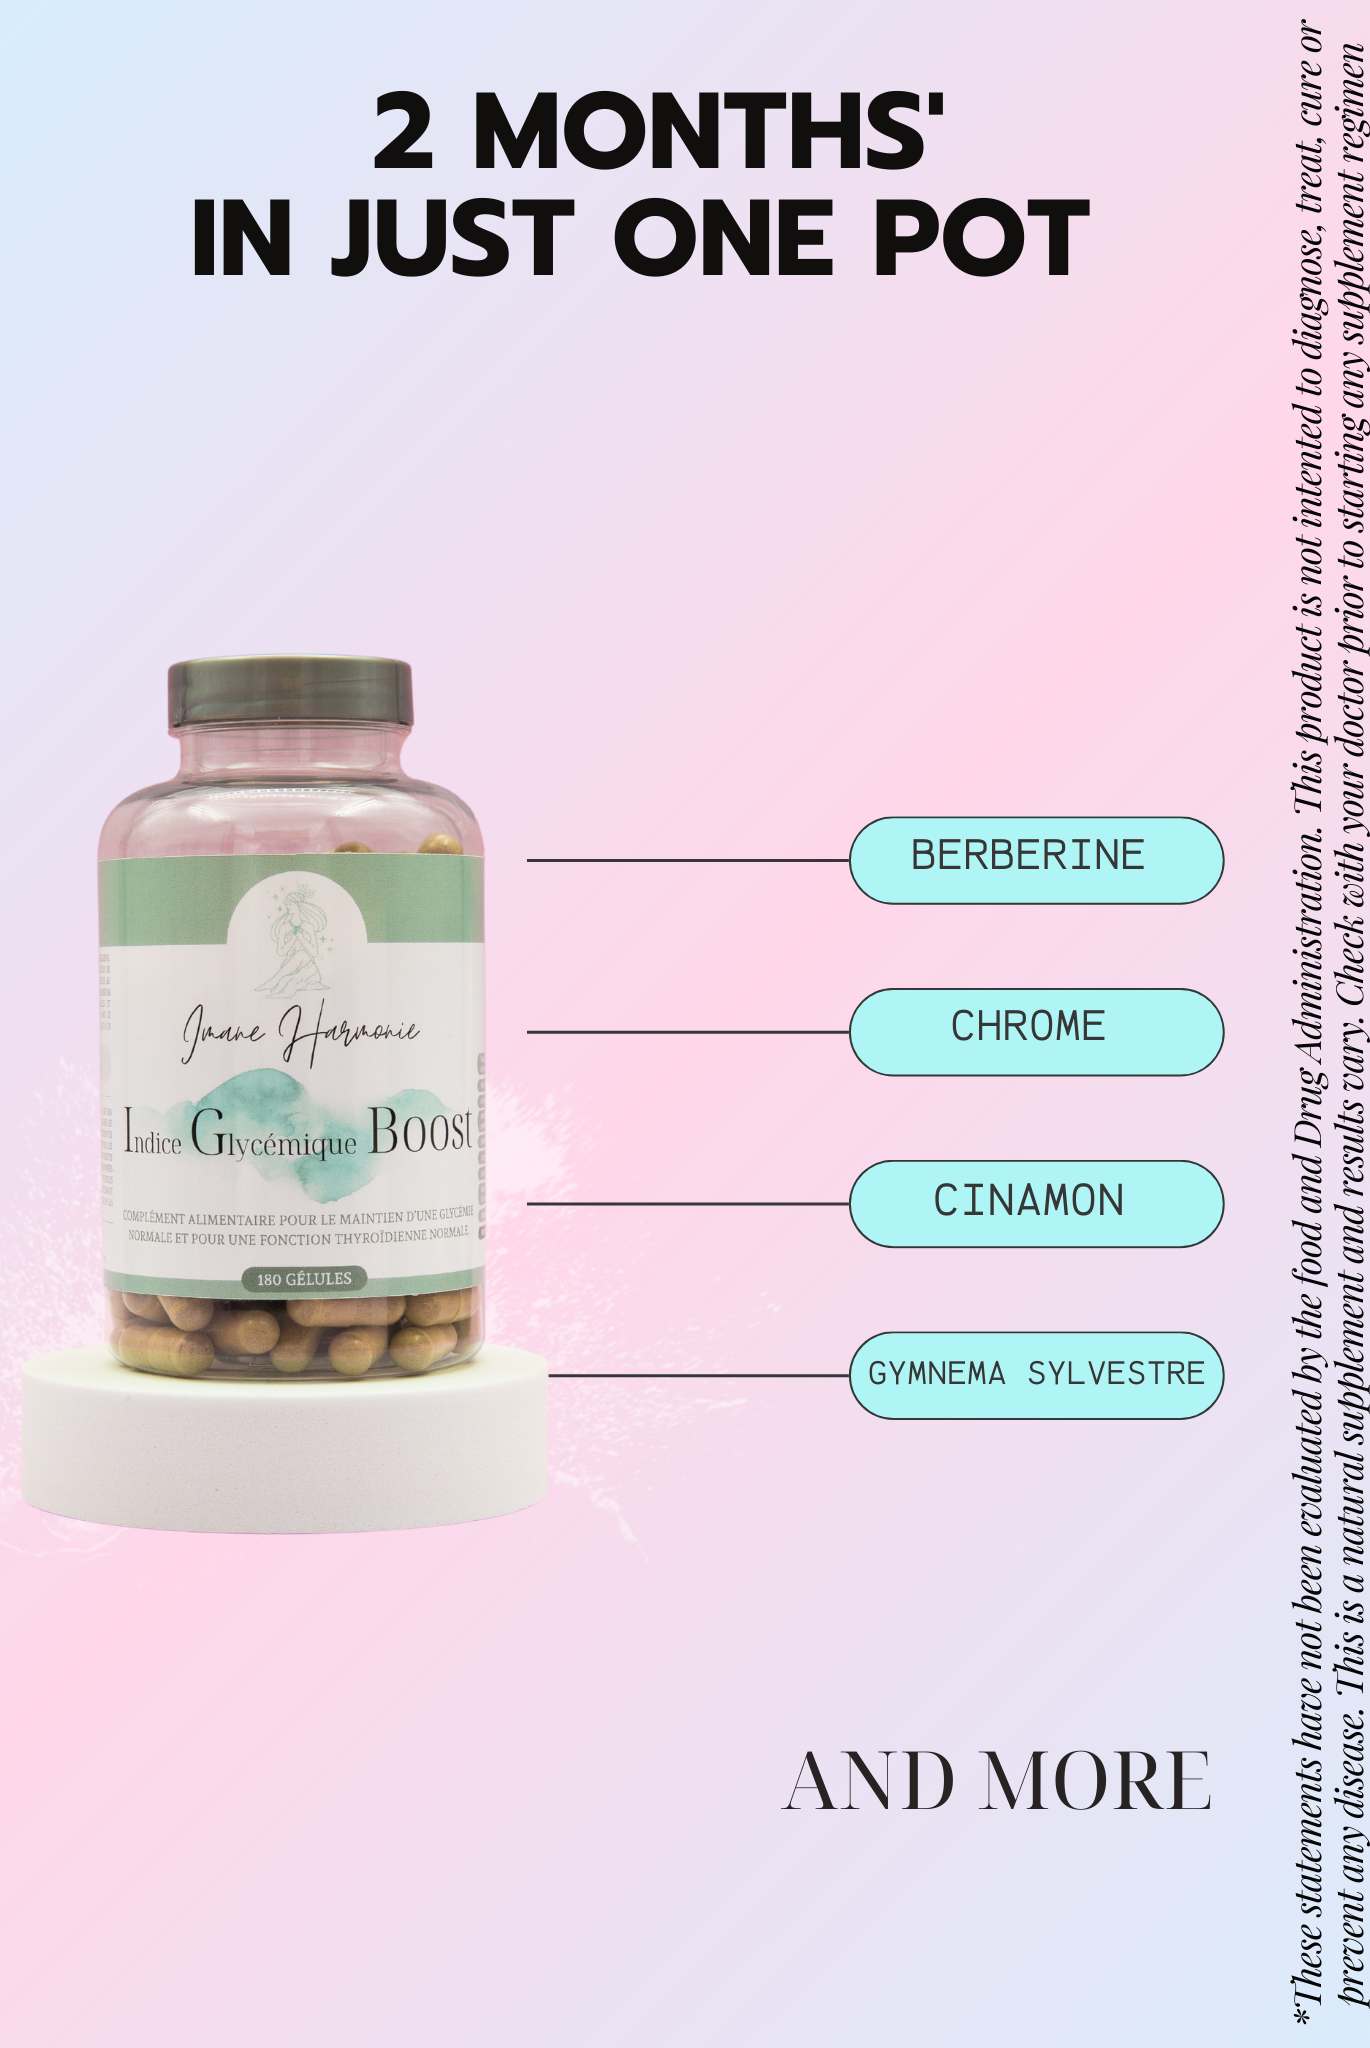 primary supplements of glycemic index boost : berberine, chrome, cinamon, gymnema sylvestre